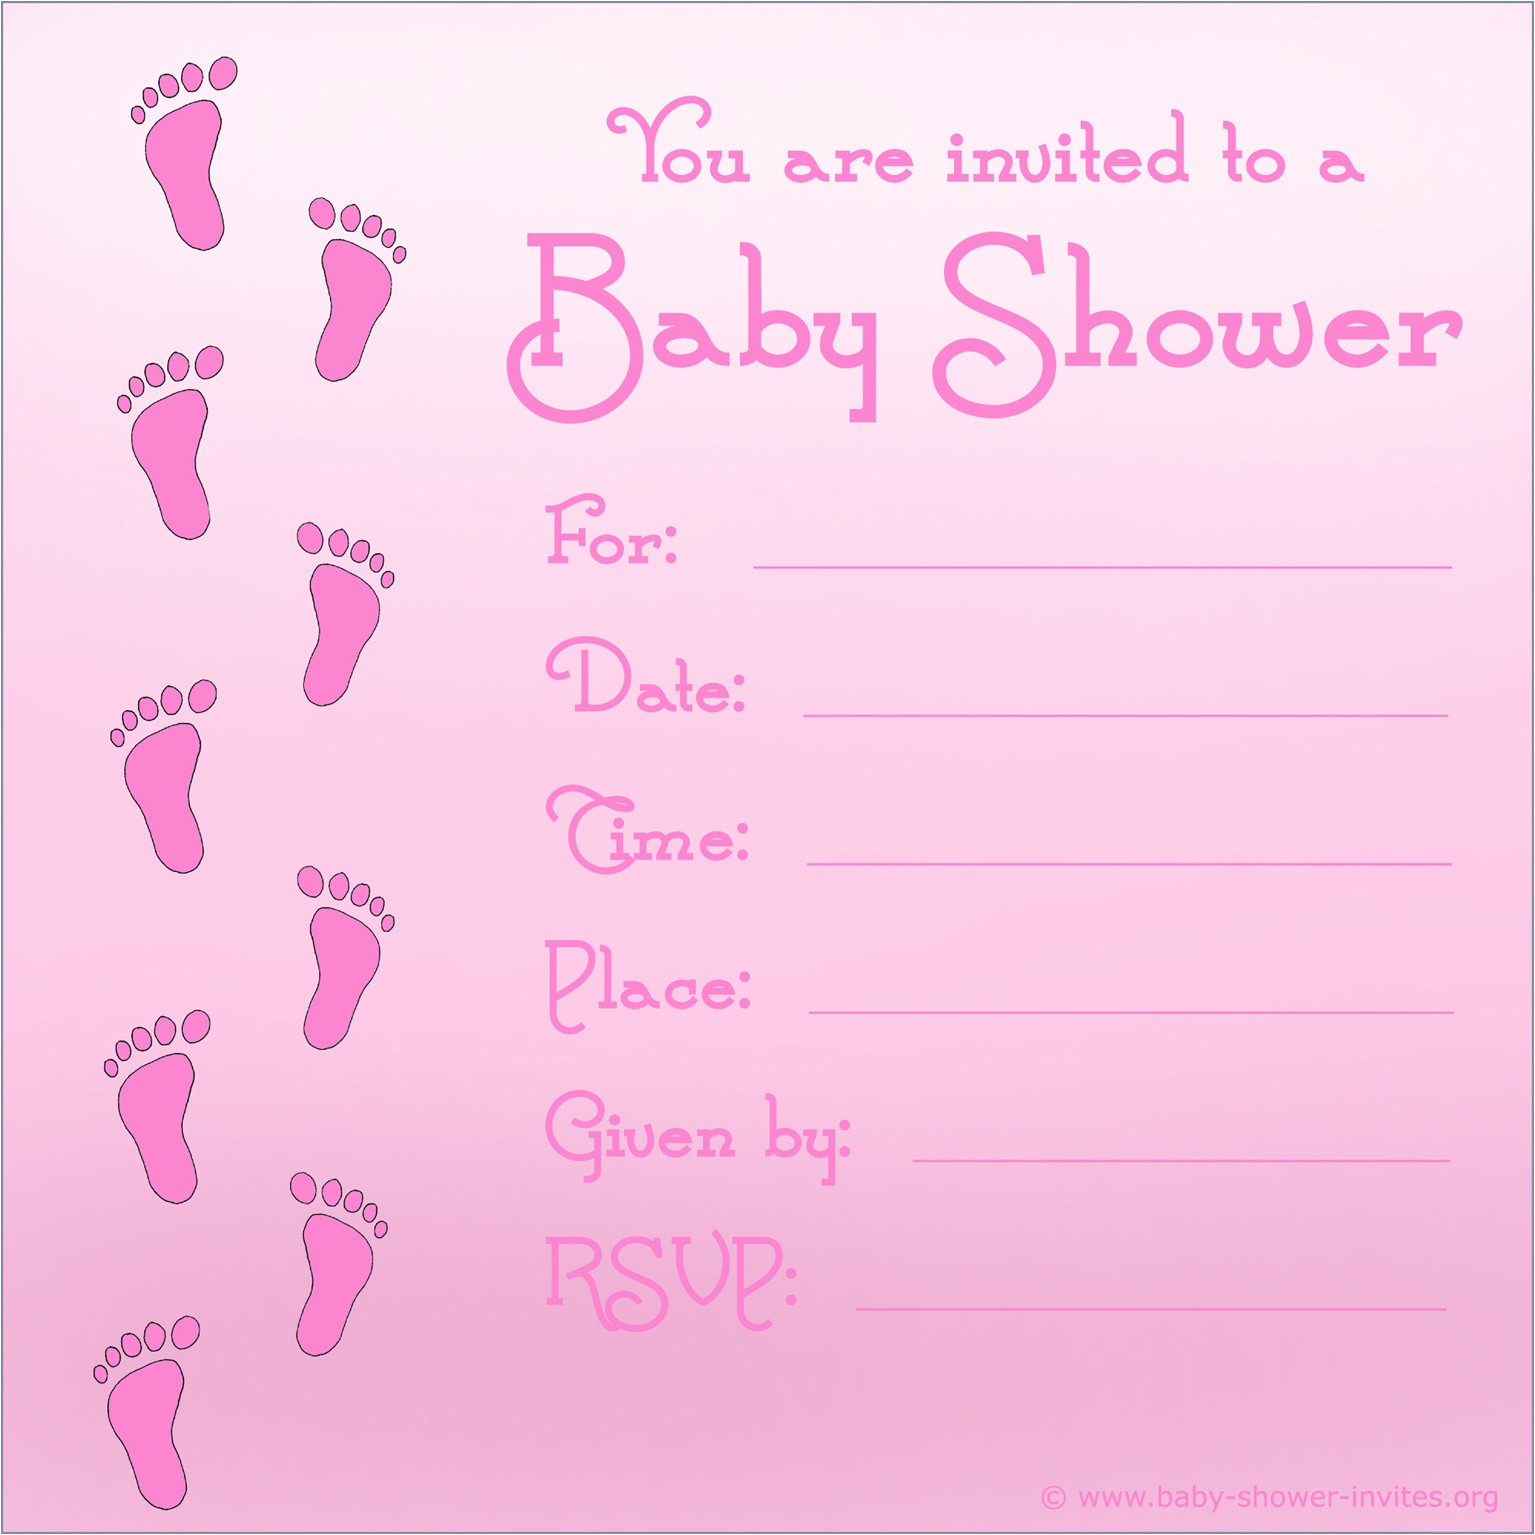 Create A Baby Shower Invitation Free Free Printable Baby Shower Invitations for Girls